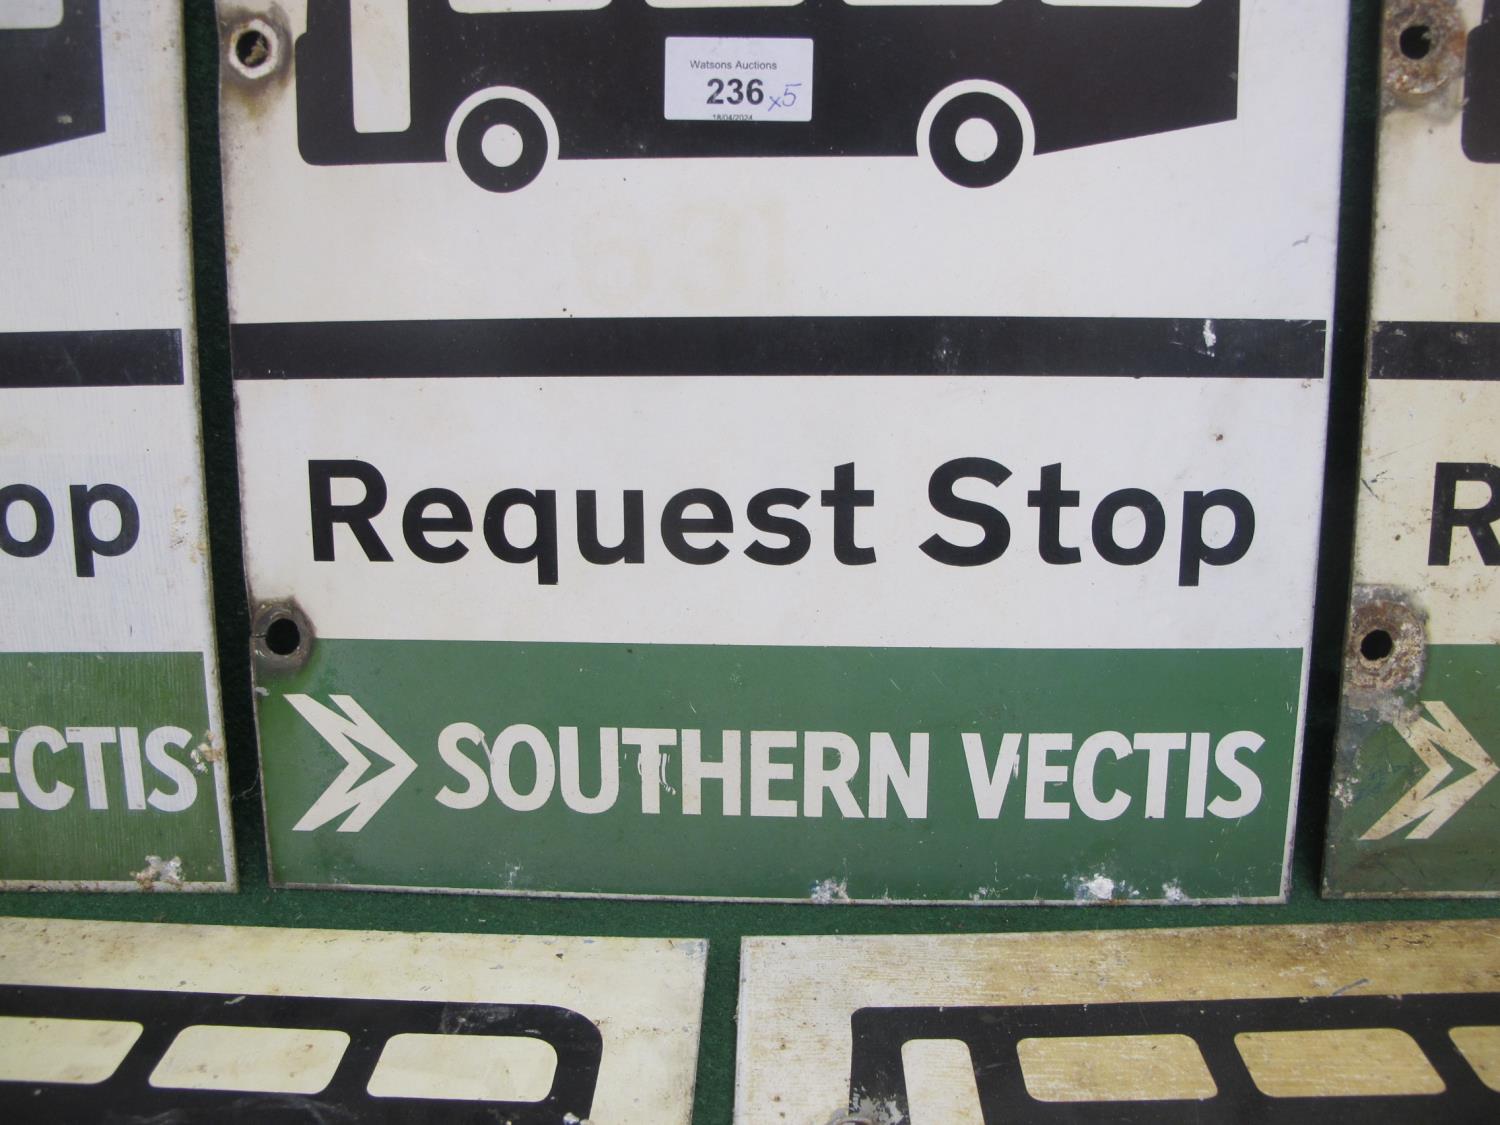 Five double sided aluminium Southern Vectis Request Bus Stop signs - 11.75" x 12.5" Please note - Image 2 of 3